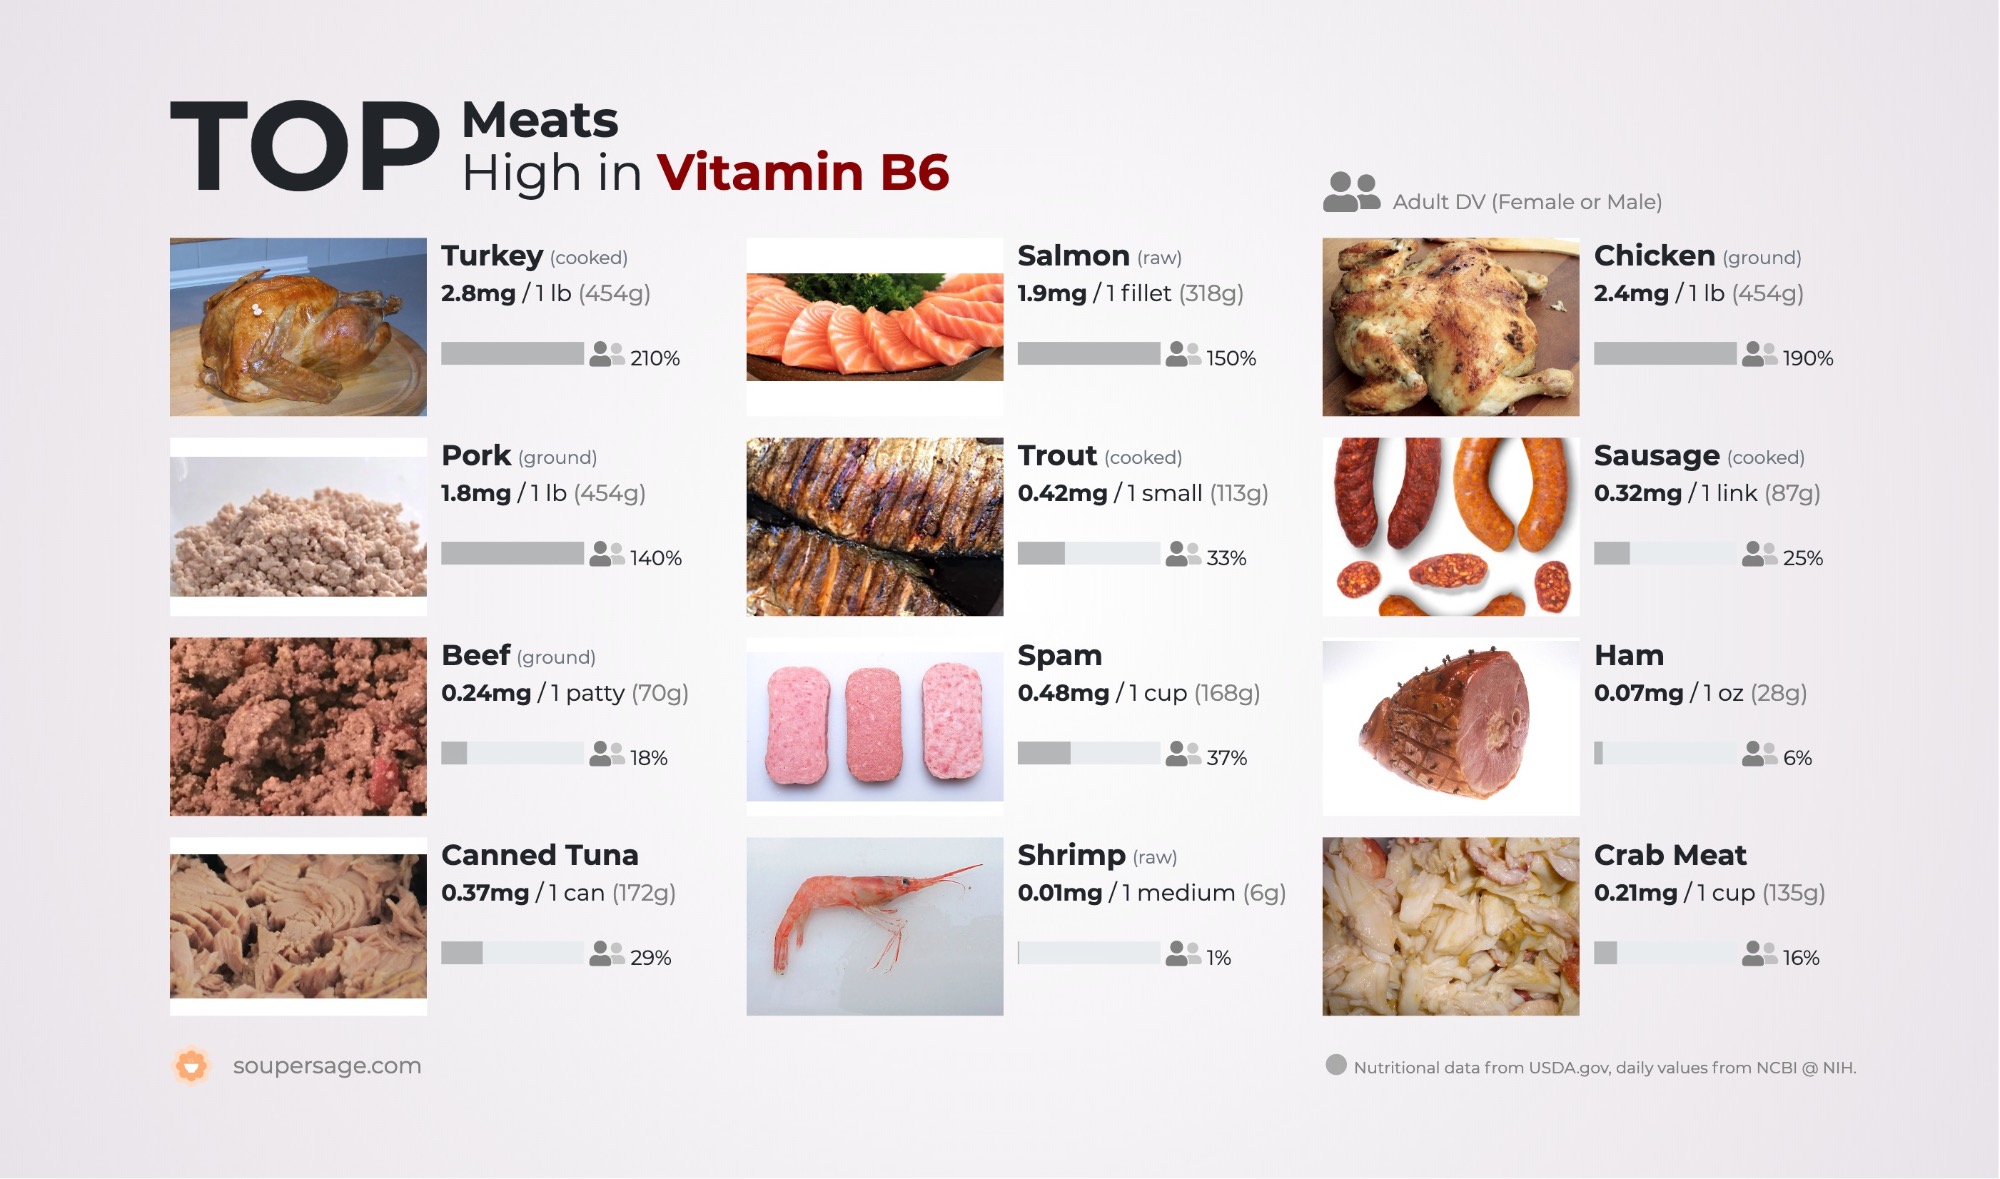 image of Top Meats High in Vitamin B6